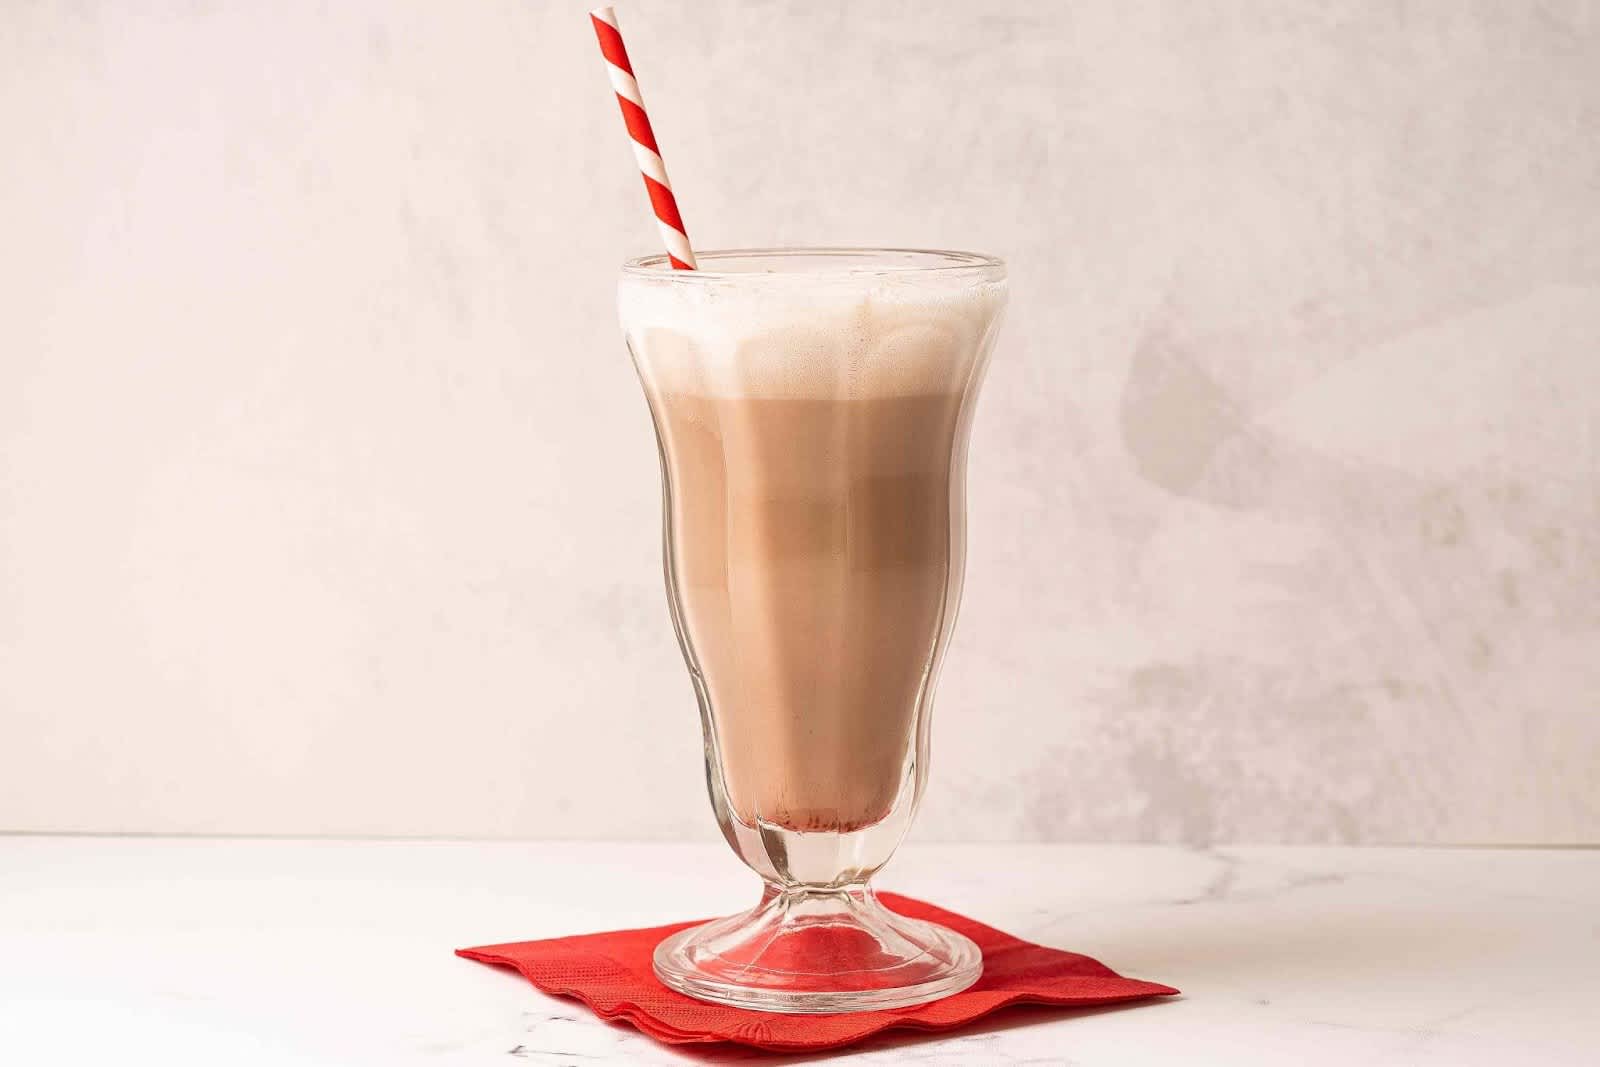 Chocolate egg cream in glass with striped straw on top of red napkin